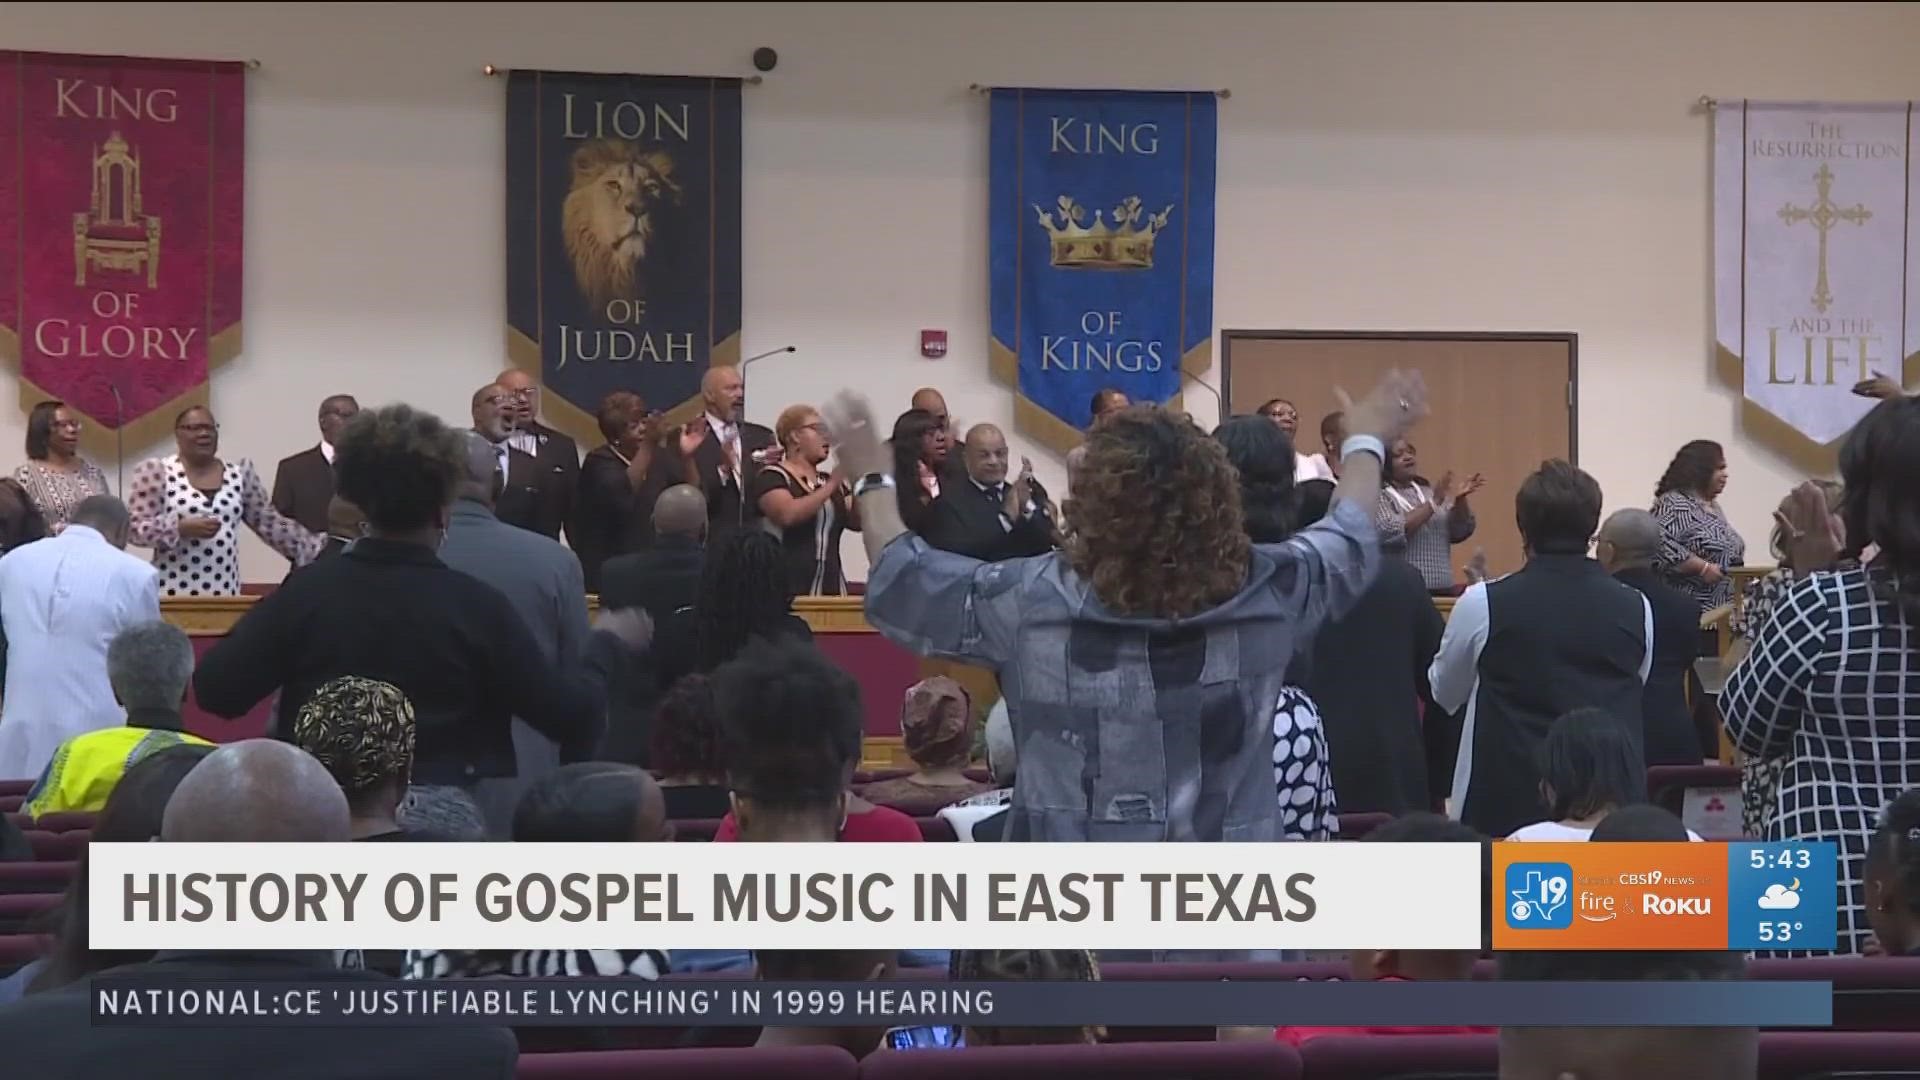 "The impact of the music has a way of putting them in a place where they can relax for a moment and have that inner connection with God," said Pastor Caraway.